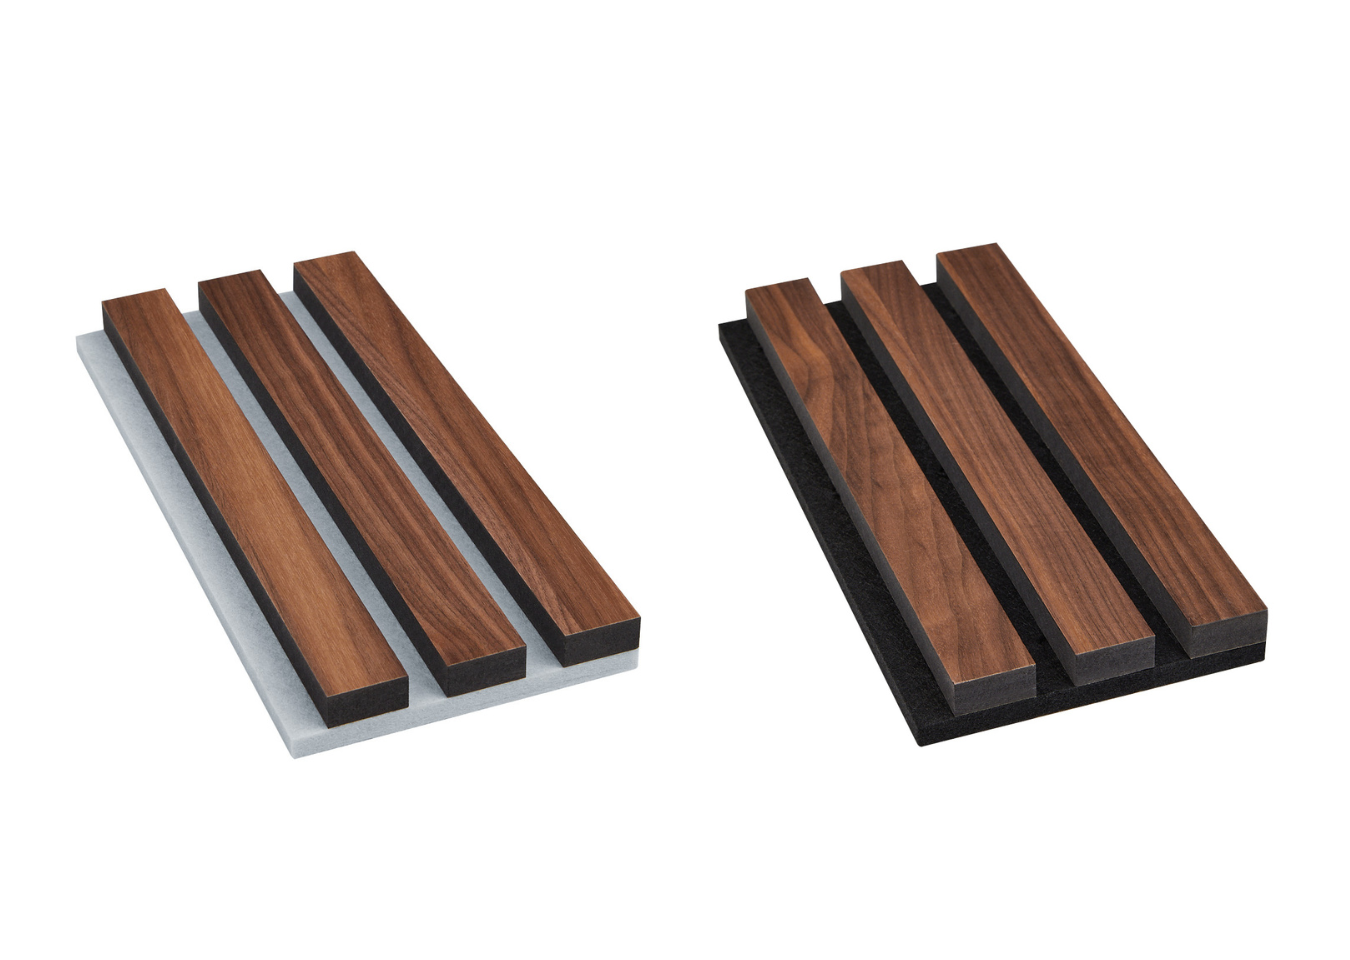 Two Deep Walnut SlatWall samples, on the right the sample has a grey backing, on the right the same has a black backing